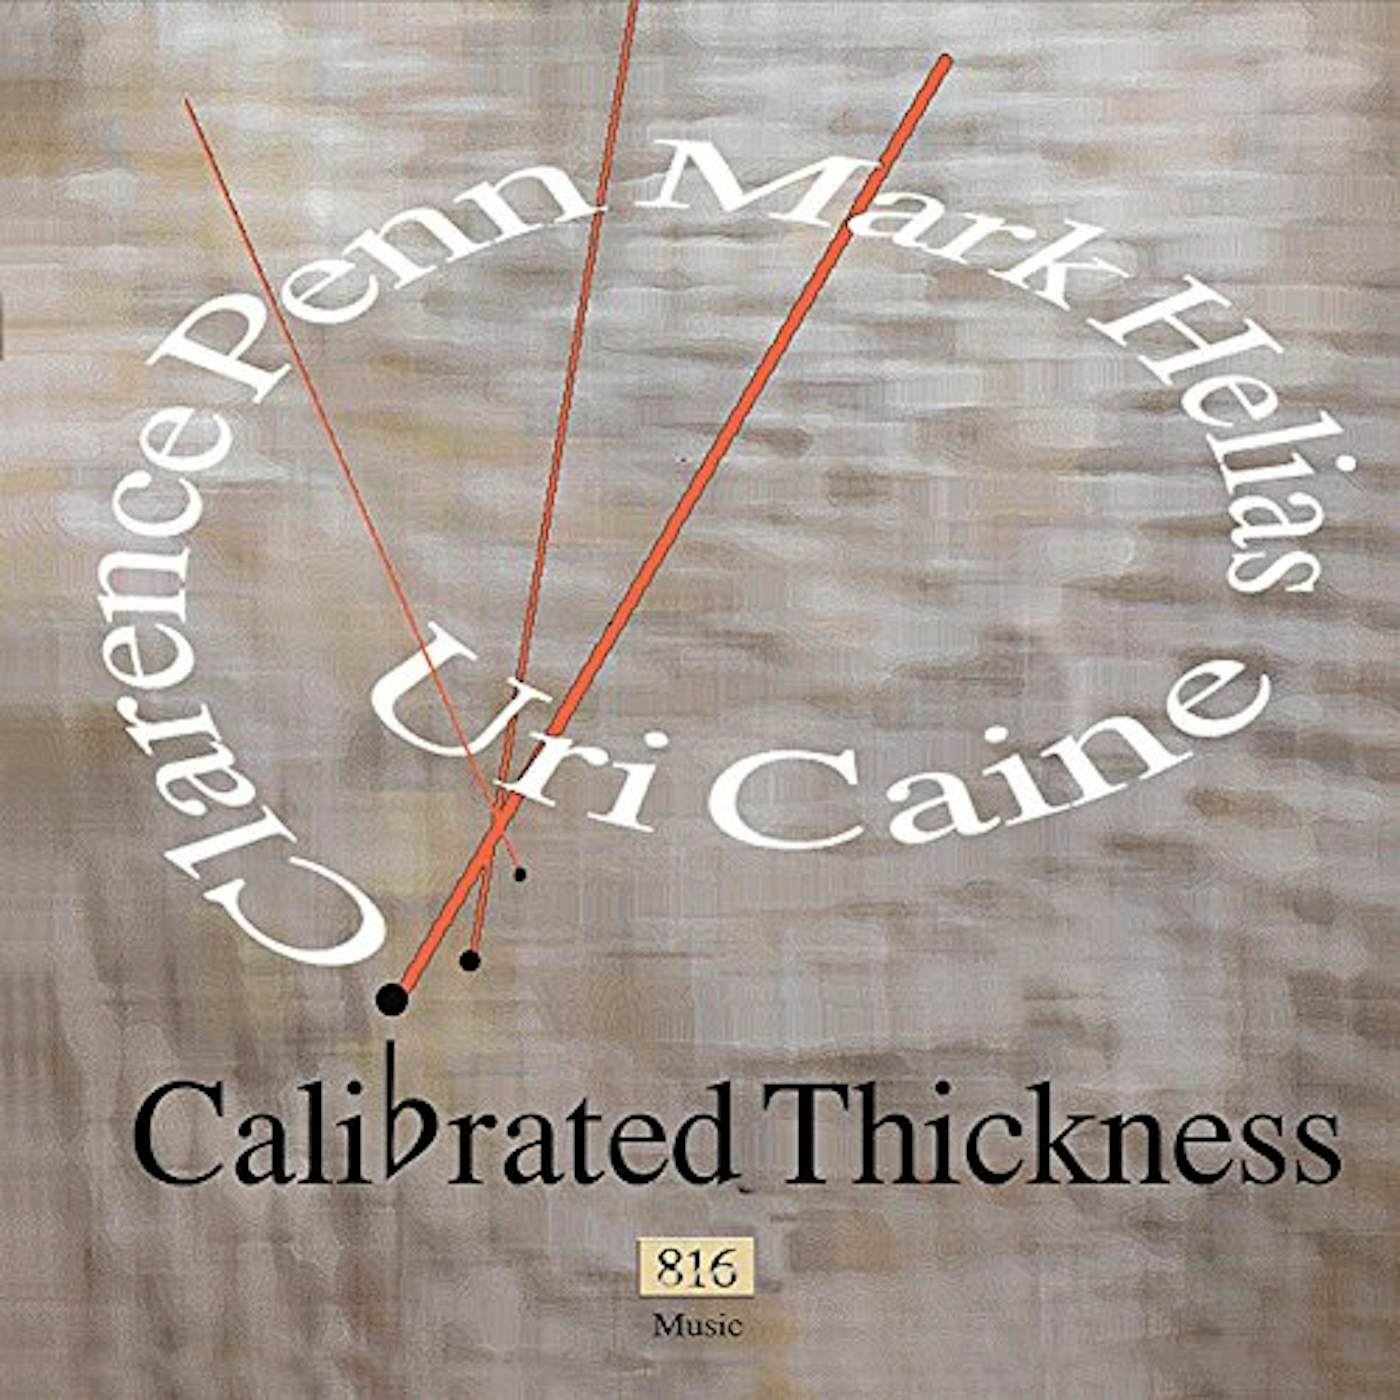 Uri Caine CALIBRATED THICKNESS CD